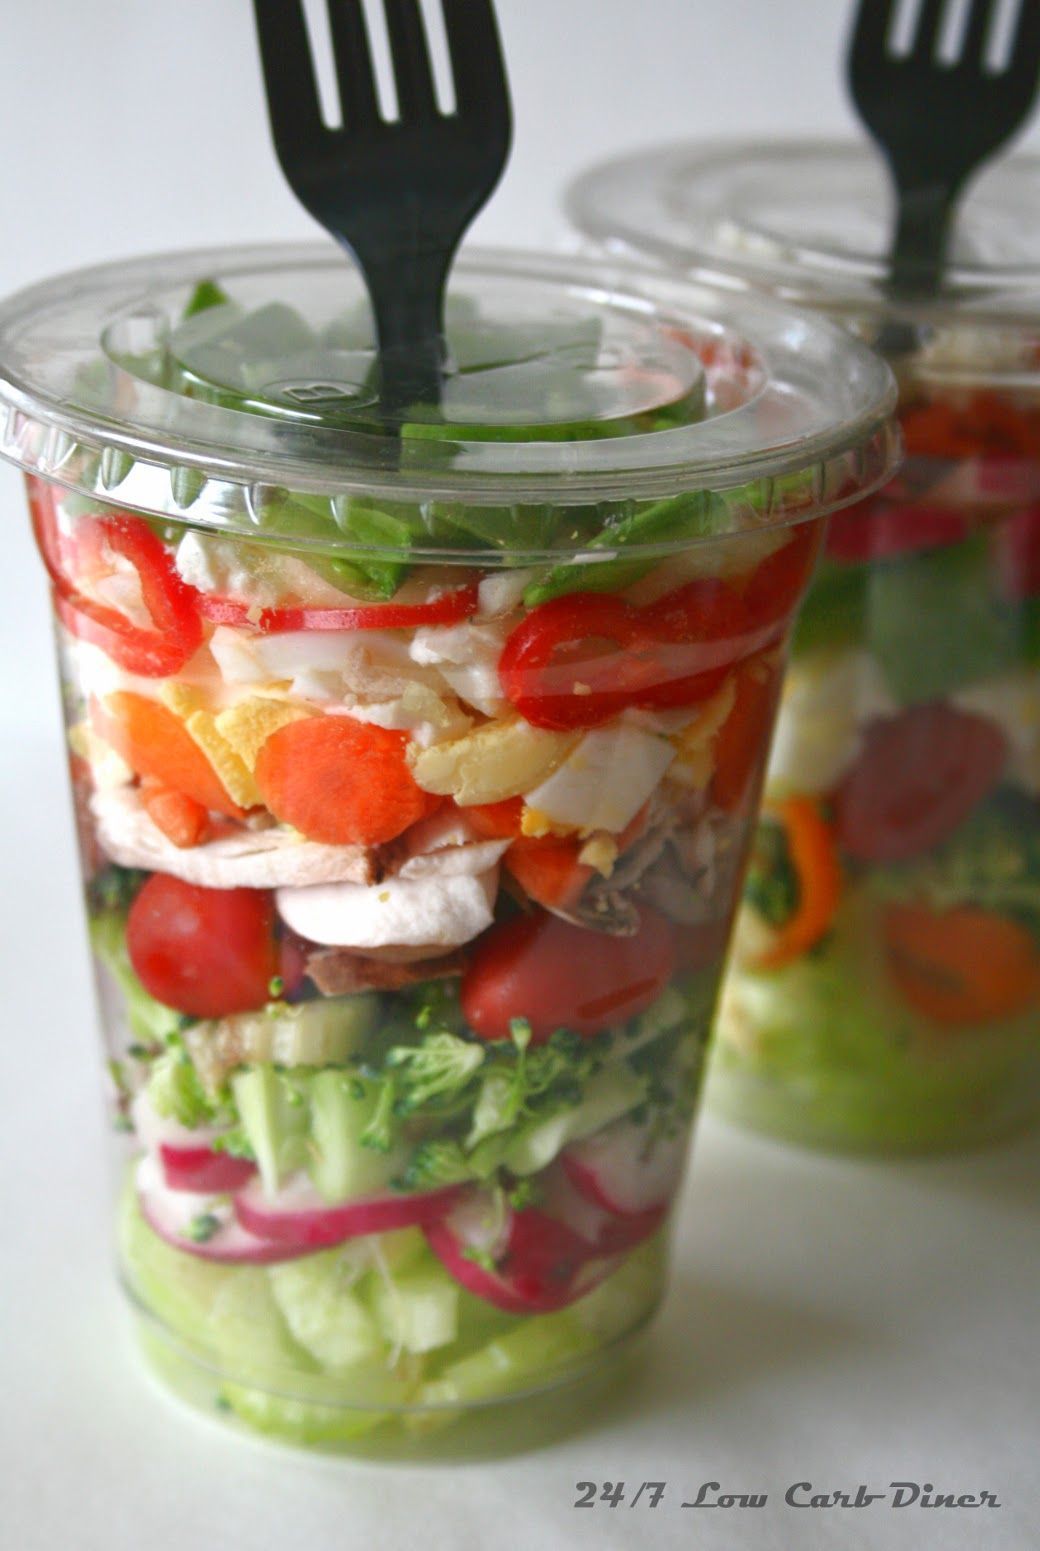 Chopped Salad in a Cup. Great for summer picnics! I would def. reverse the fork